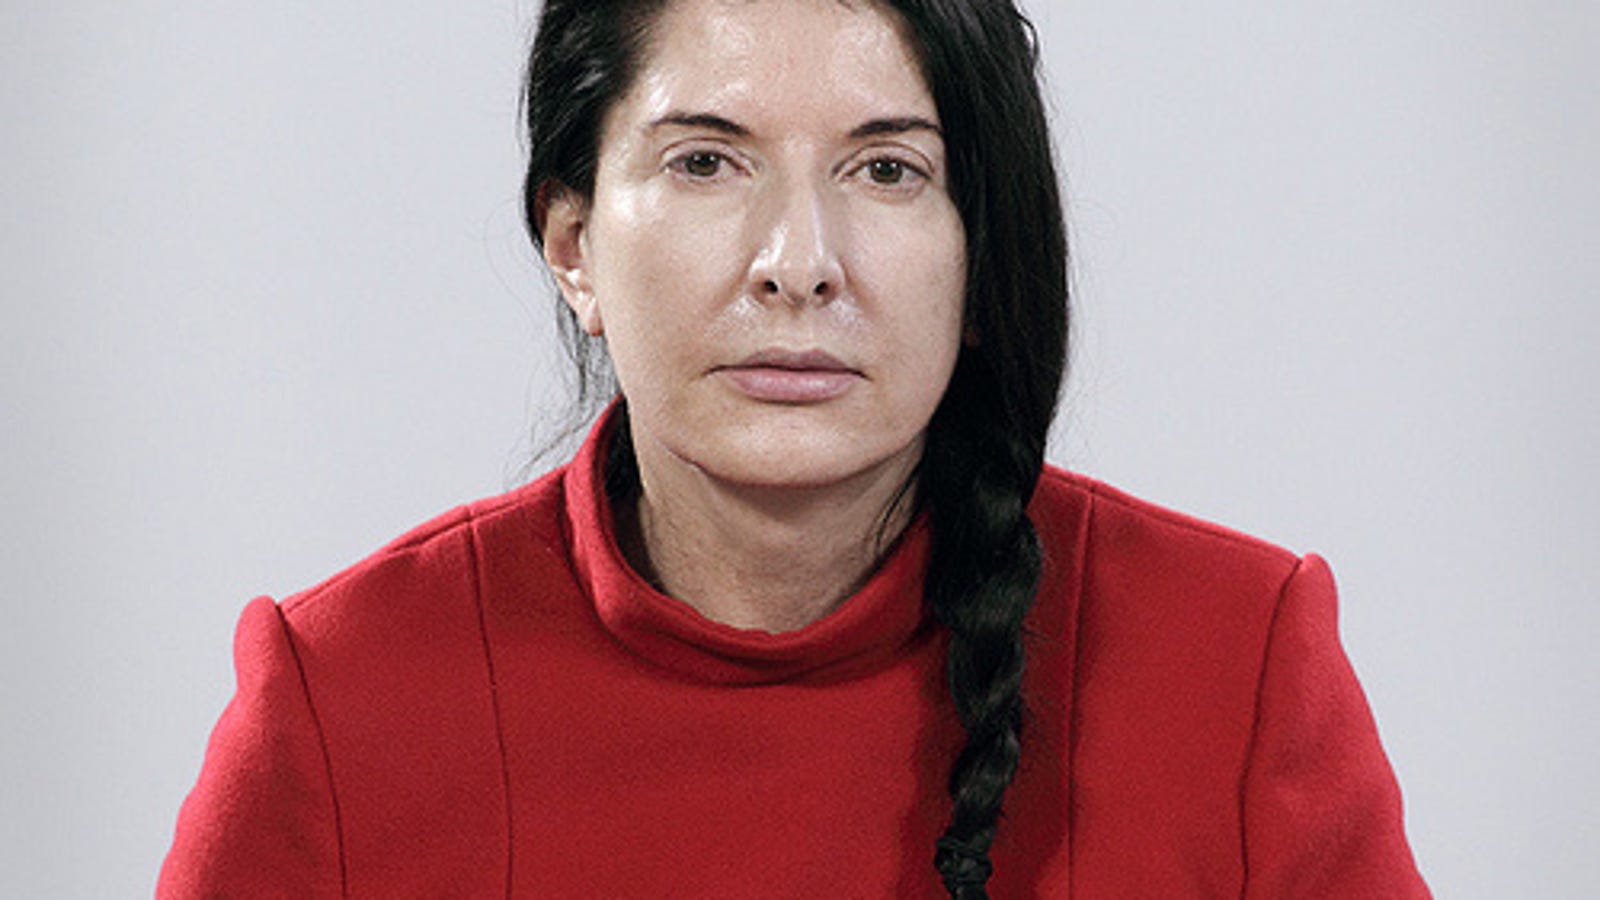 Can Marina Abramović Even See People Without Her Glasses